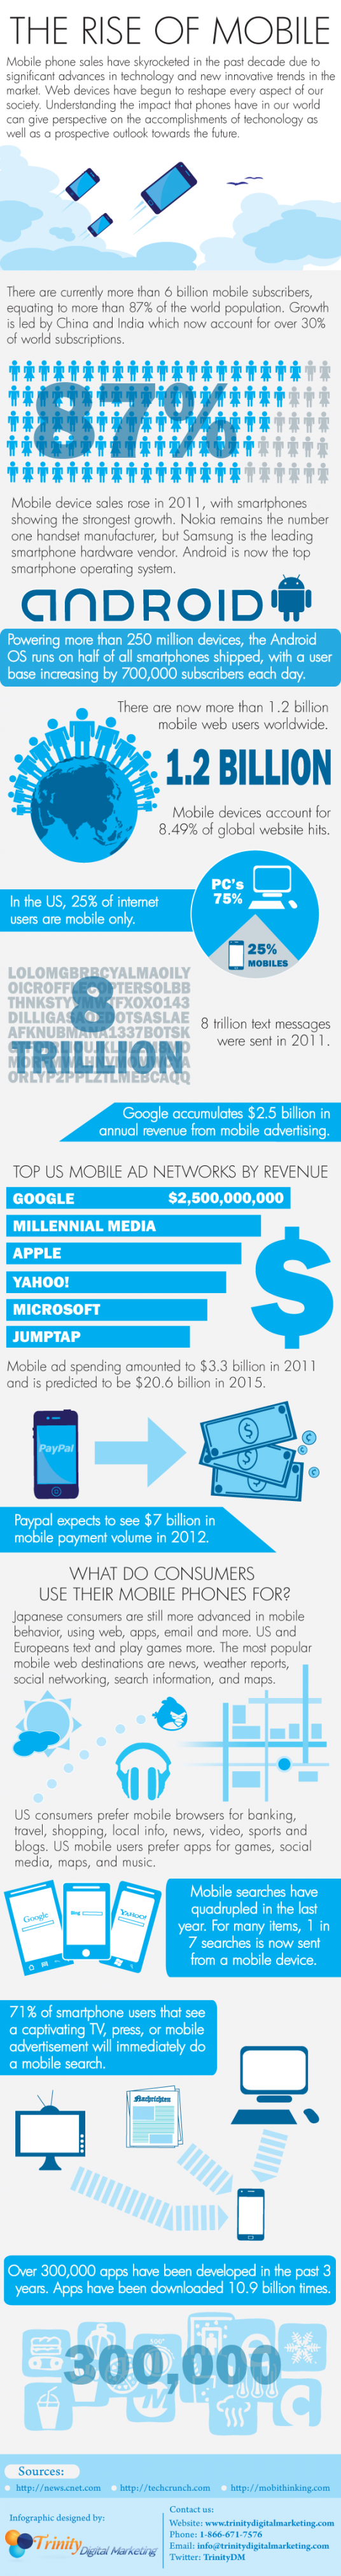 0710 the rise of mobile infographic2 e1341749300299